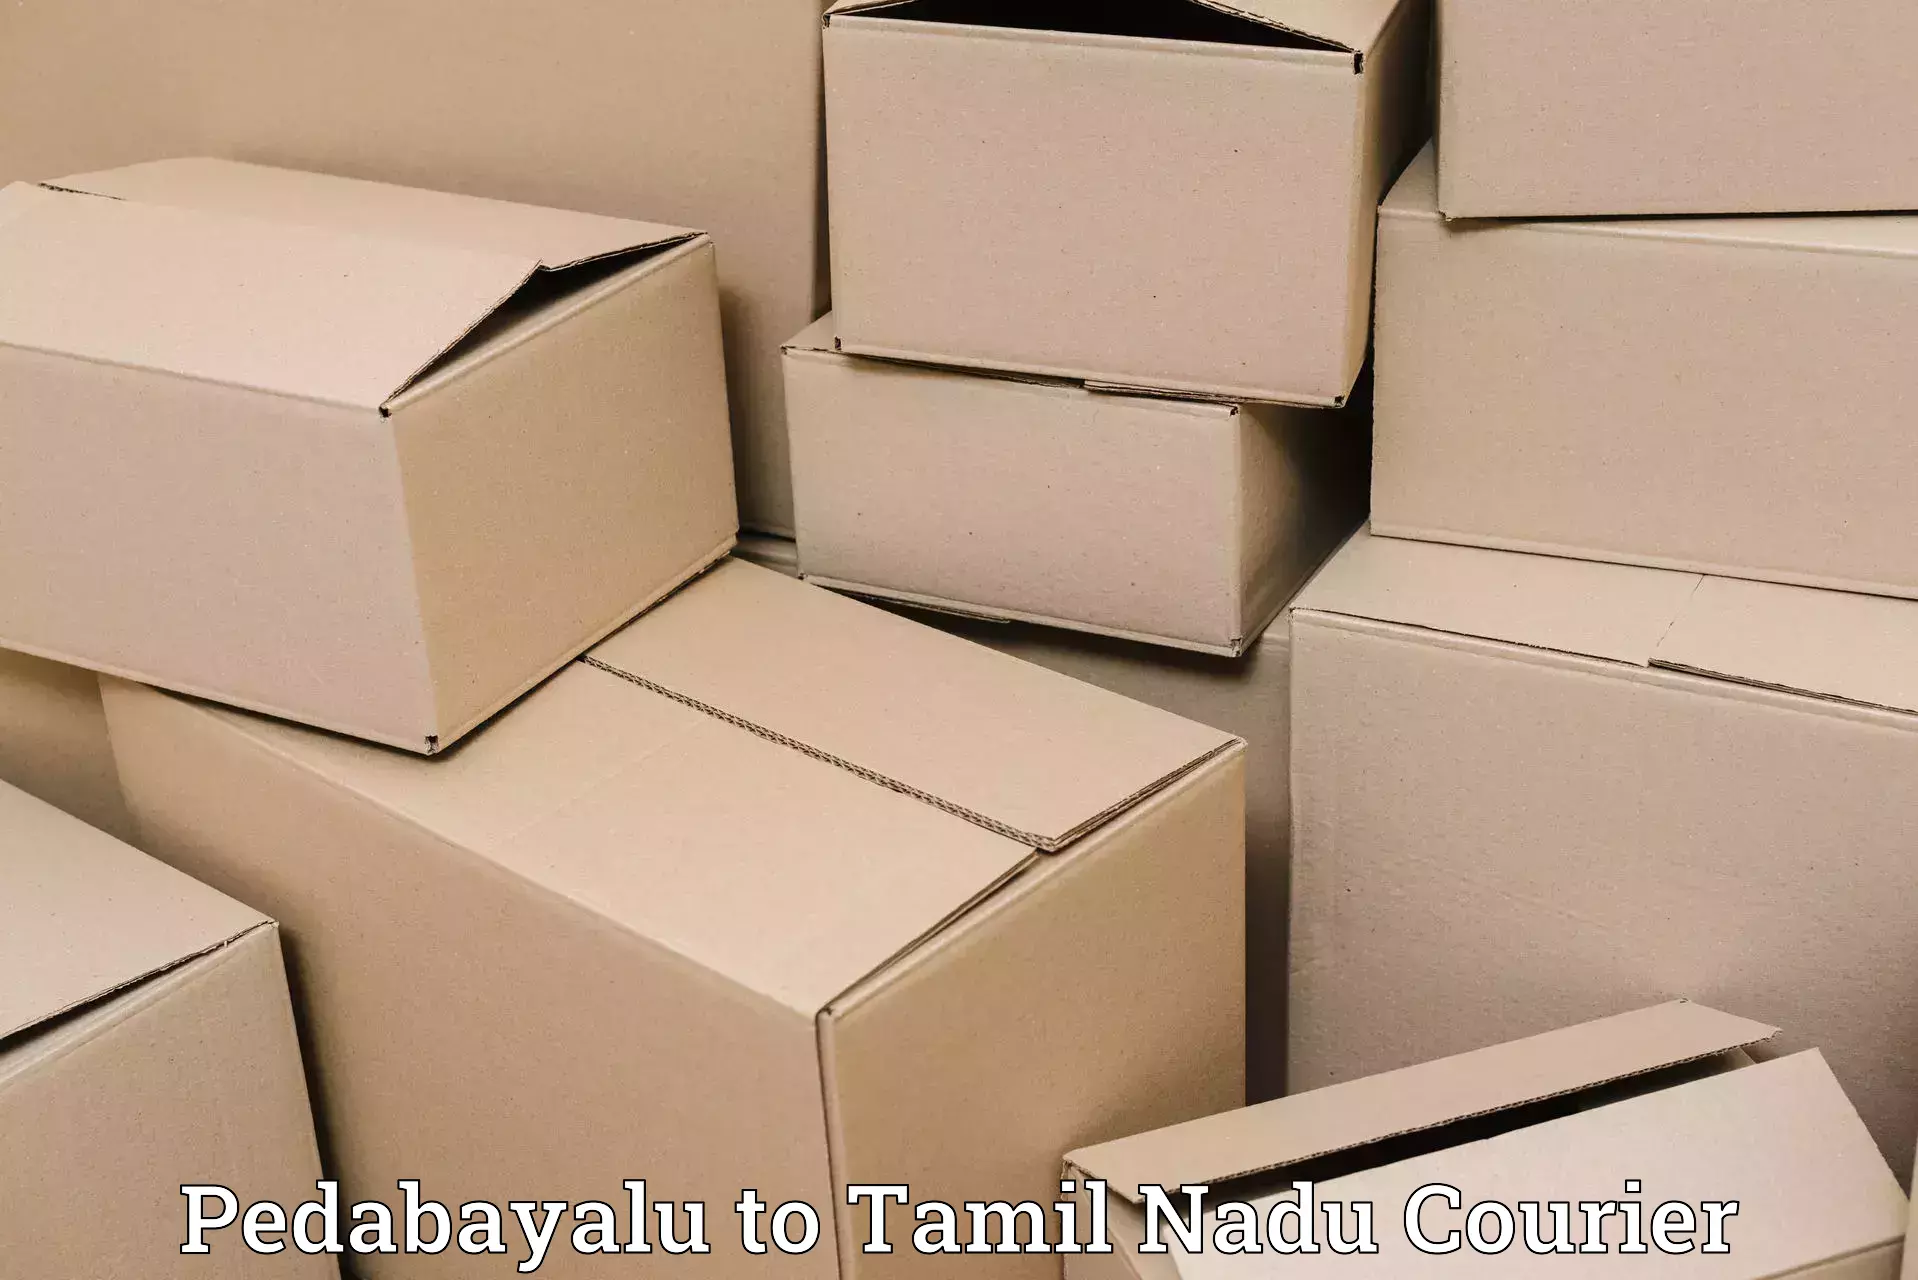 Express courier facilities Pedabayalu to Ennore Port Chennai